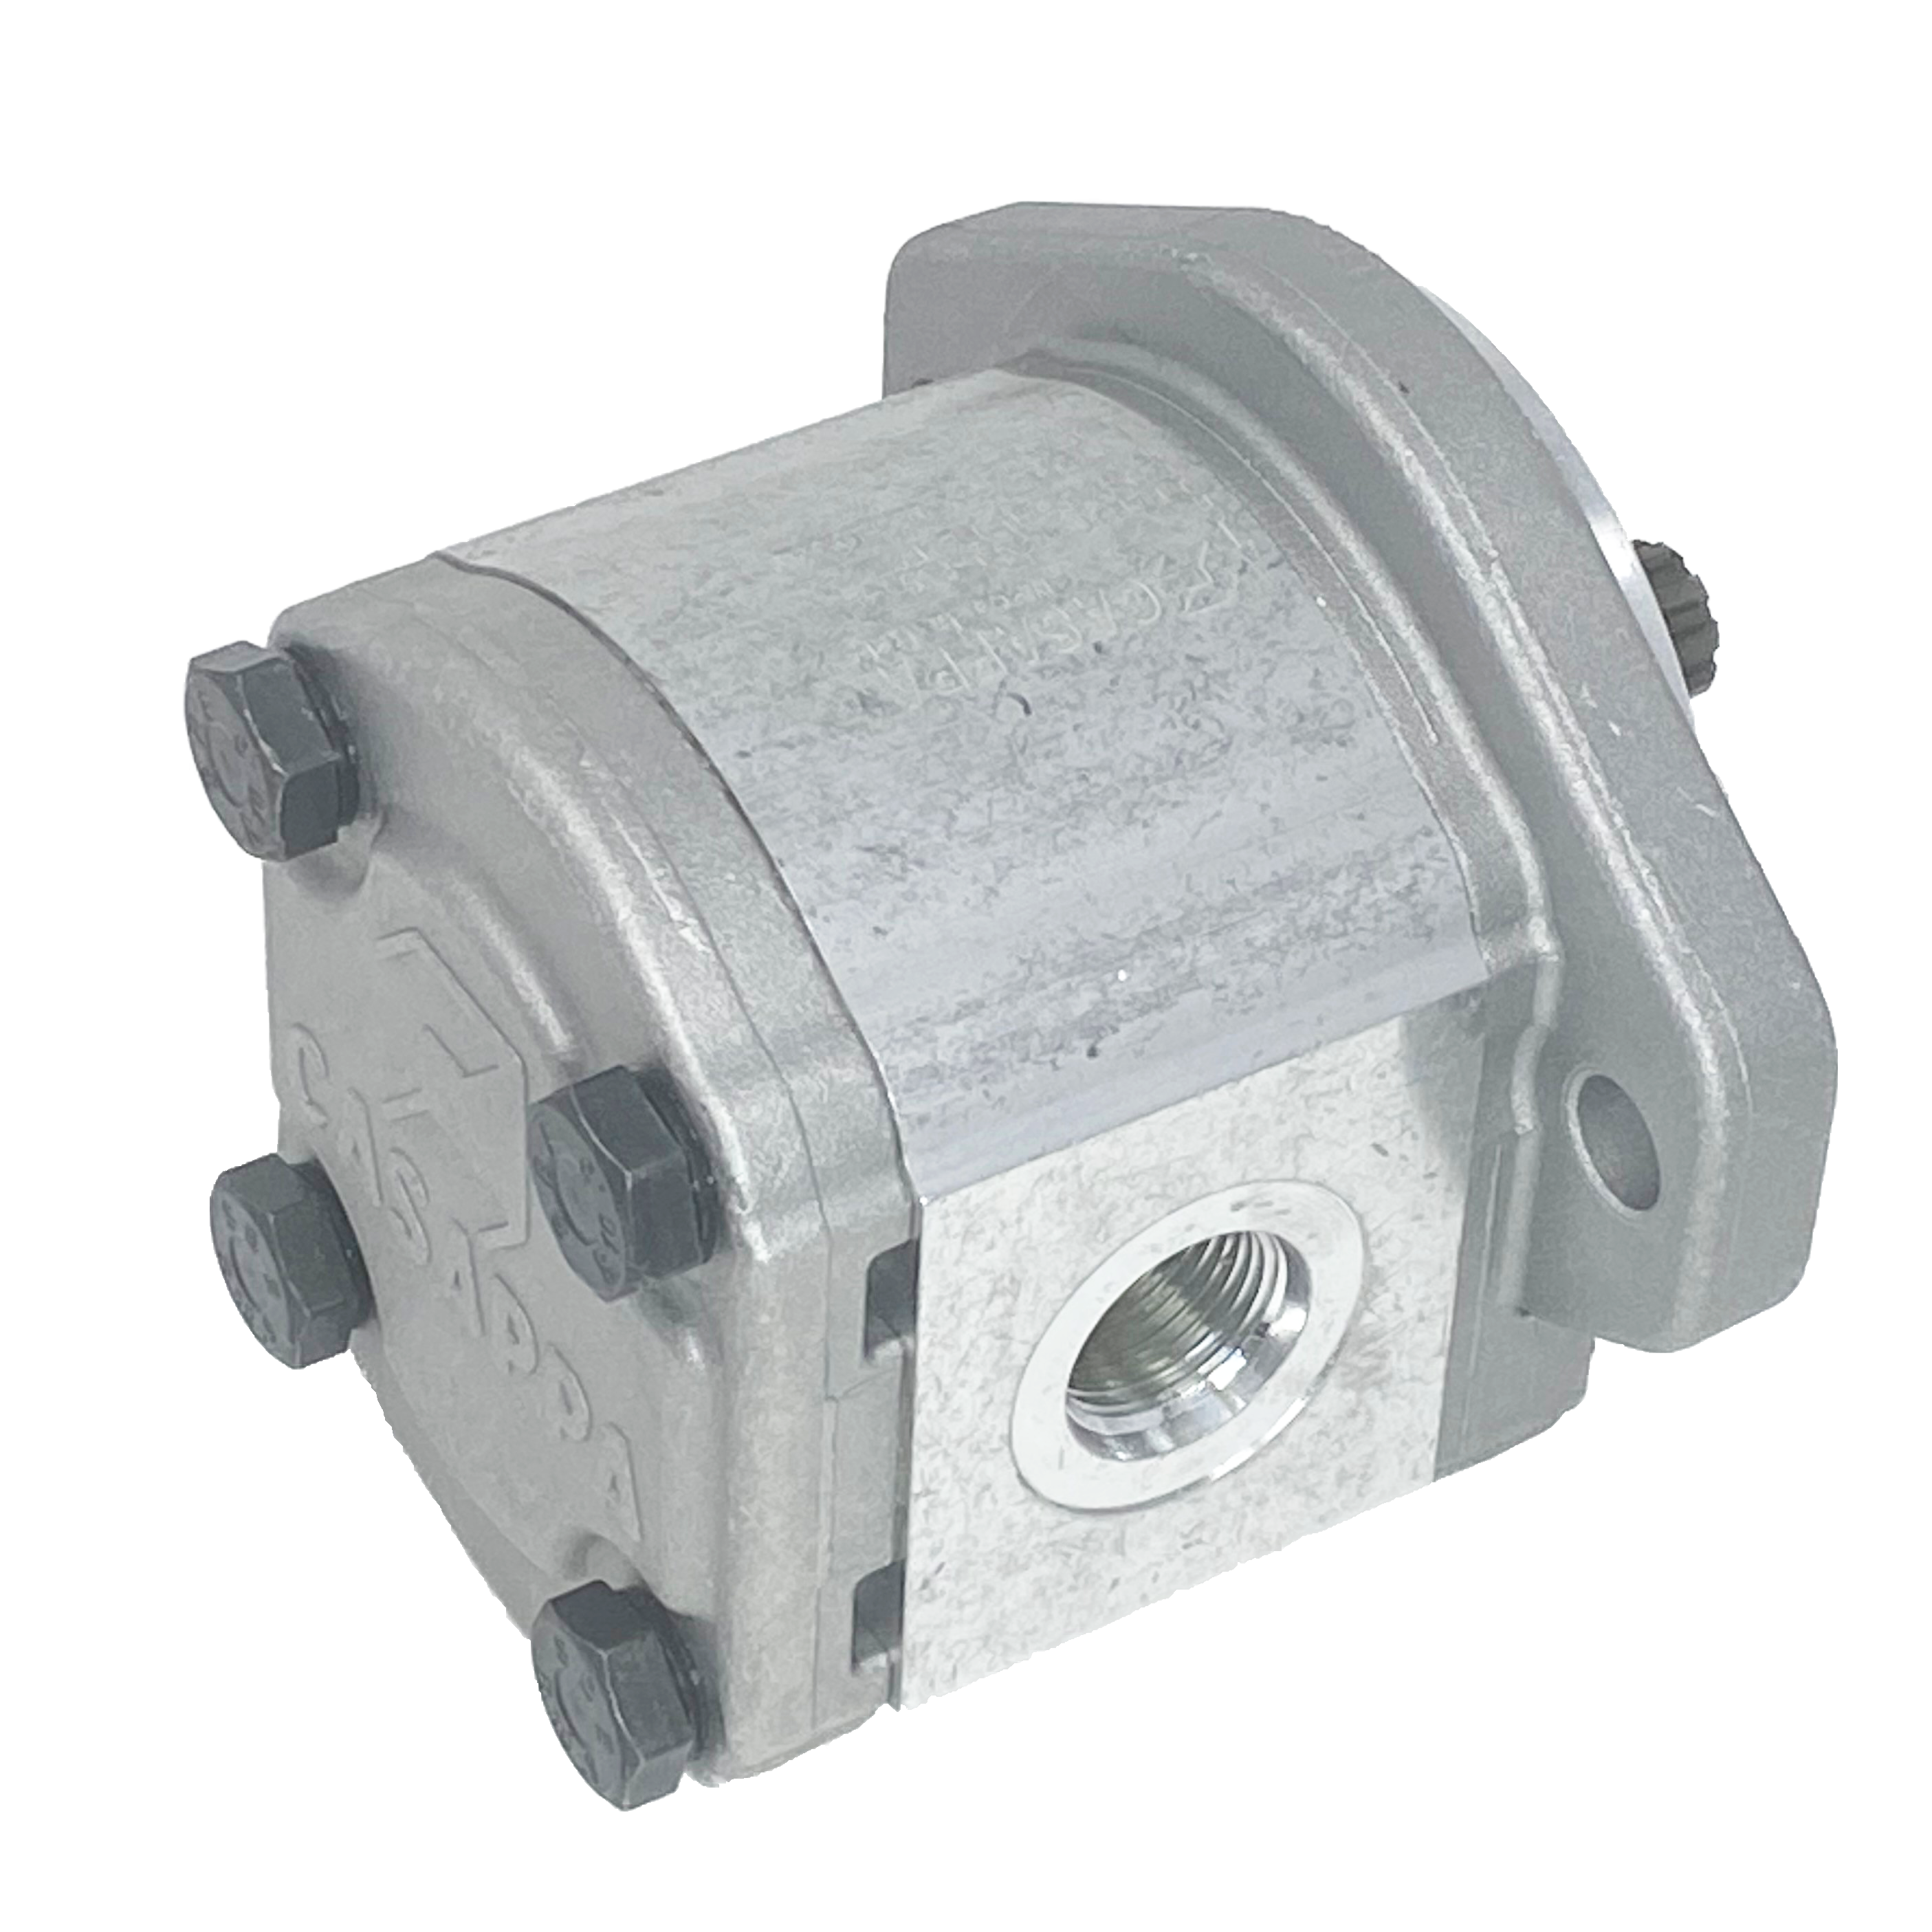 PLP20.6,3S0-49S1-LOF/OC-S7-N-EL-FS : Casappa Polaris Gear Pump, 6.61cc, 3625psi Rated, 4000RPM, CCW, 5/8" Keyed Shaft, SAE A 2-Bolt Flange, 1" #16 SAE Inlet, 0.625 (5/8") #10 SAE Outlet, Aluminum Body & Flange